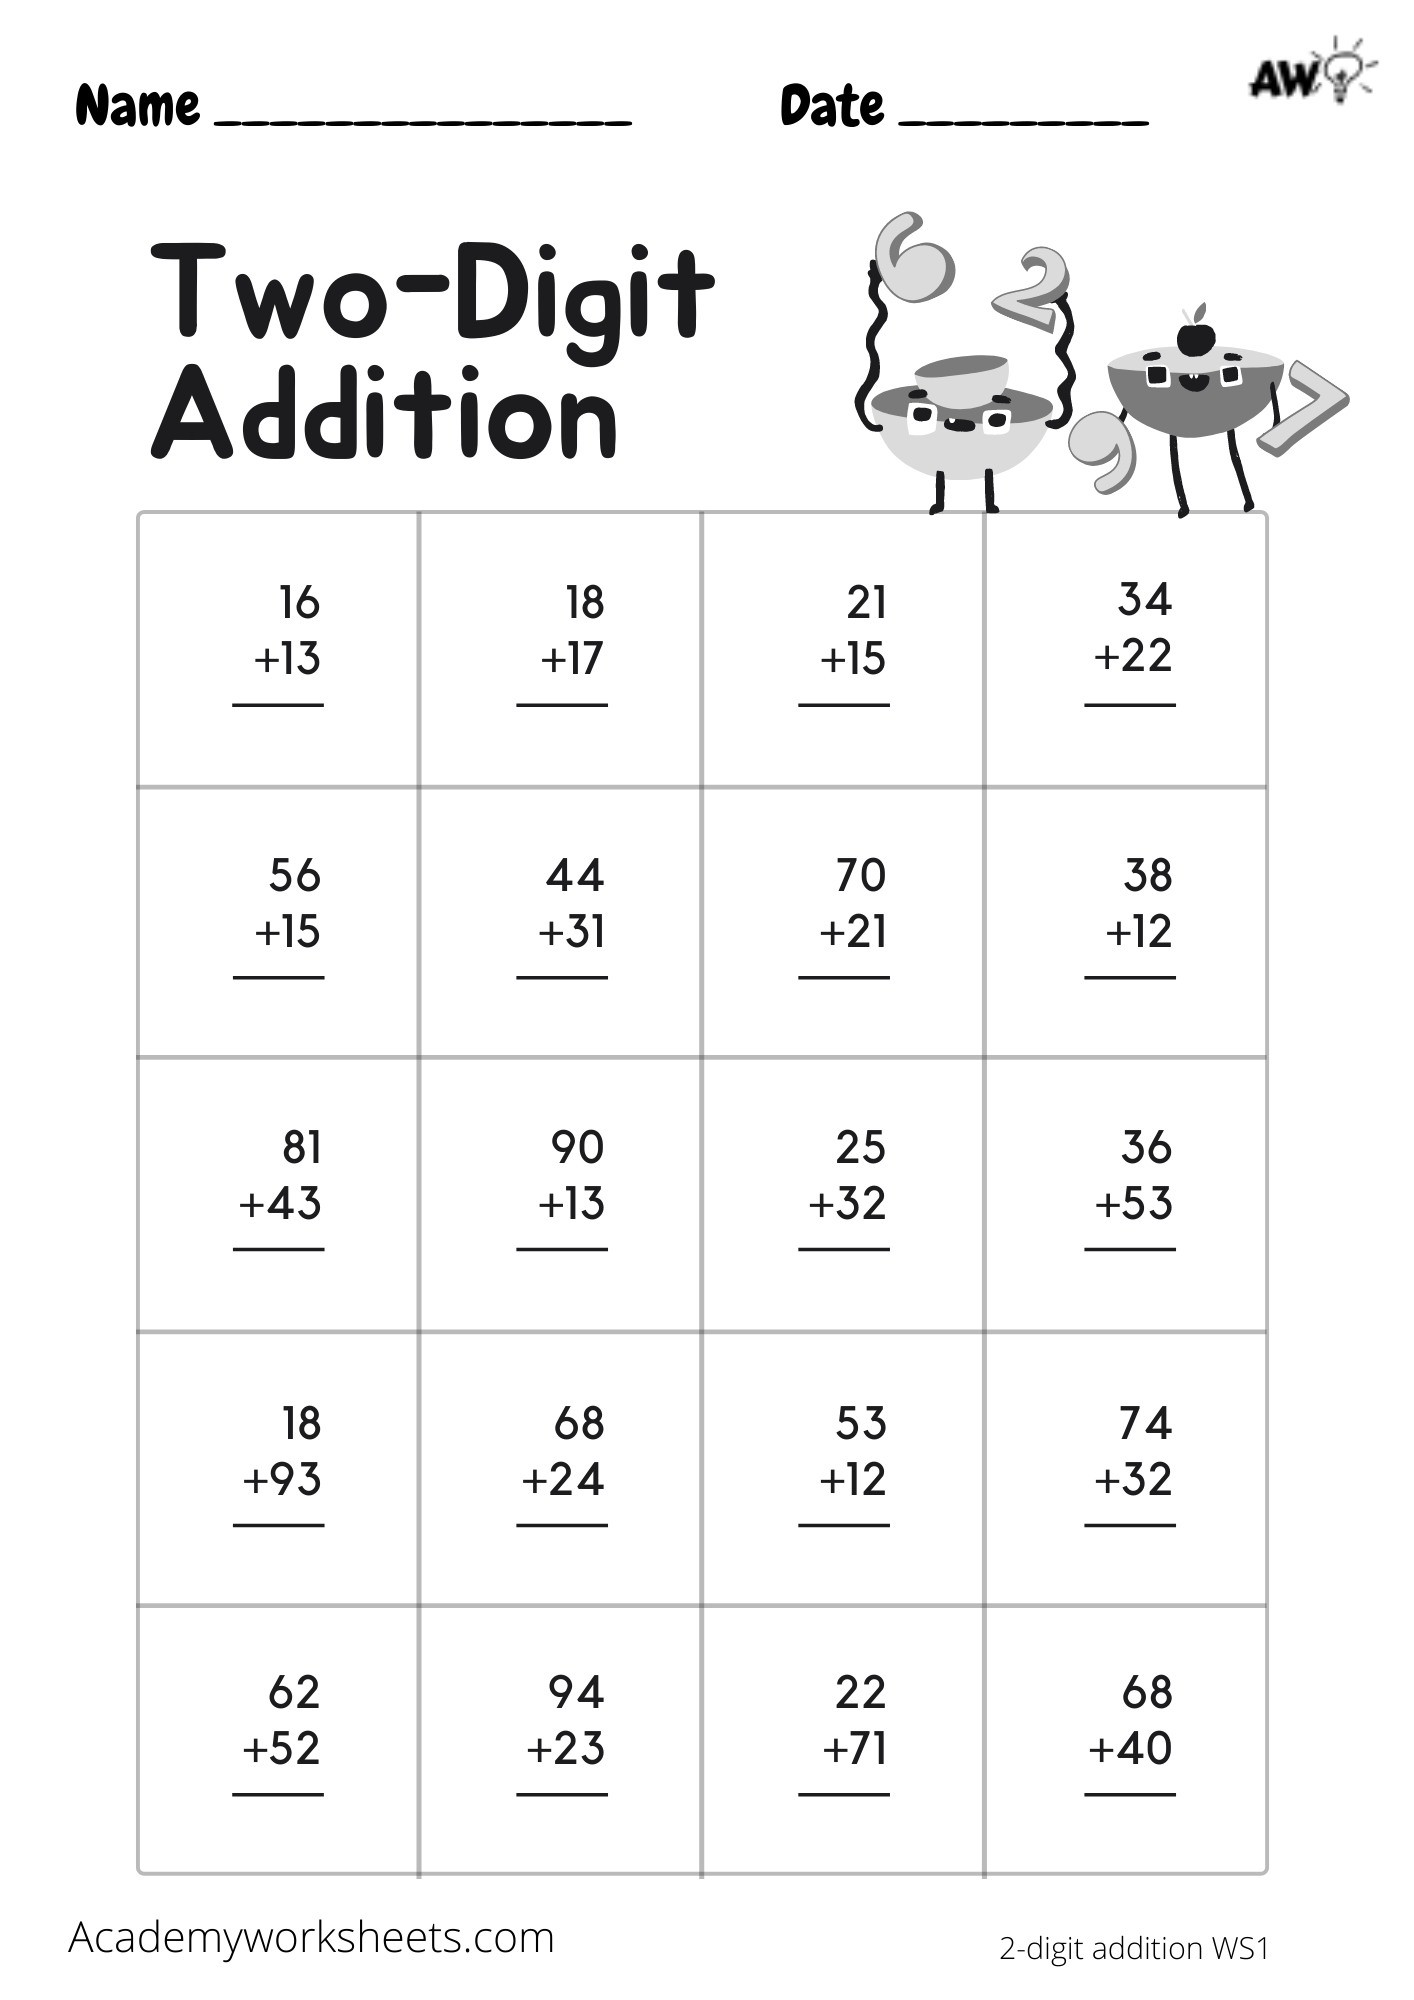 2 Digit Addition With Carrying Academy Worksheets